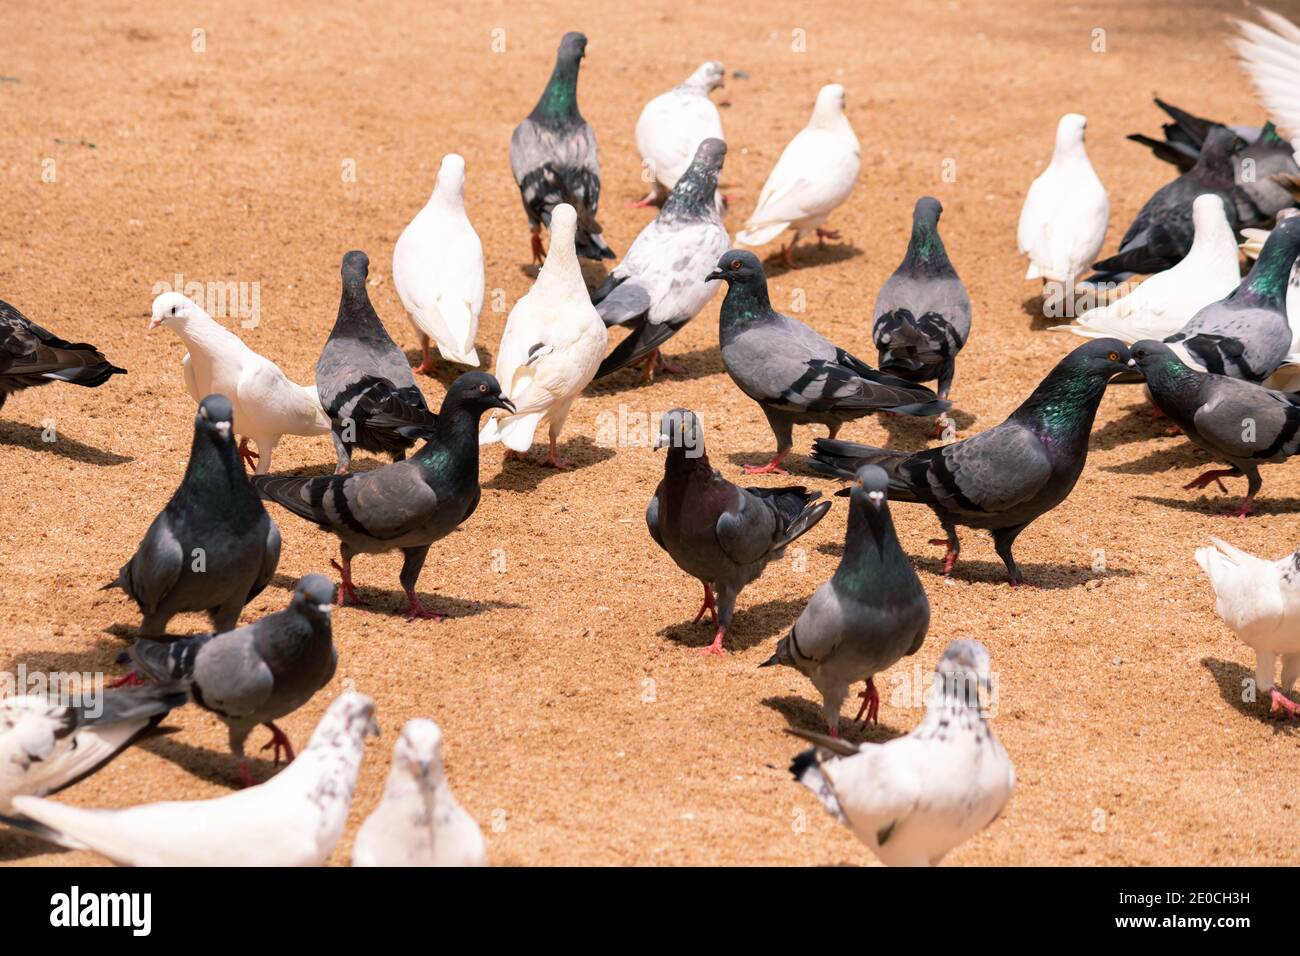 Large flock of colorful pigeons on the ground, hot and bright daylight, Stock Photo